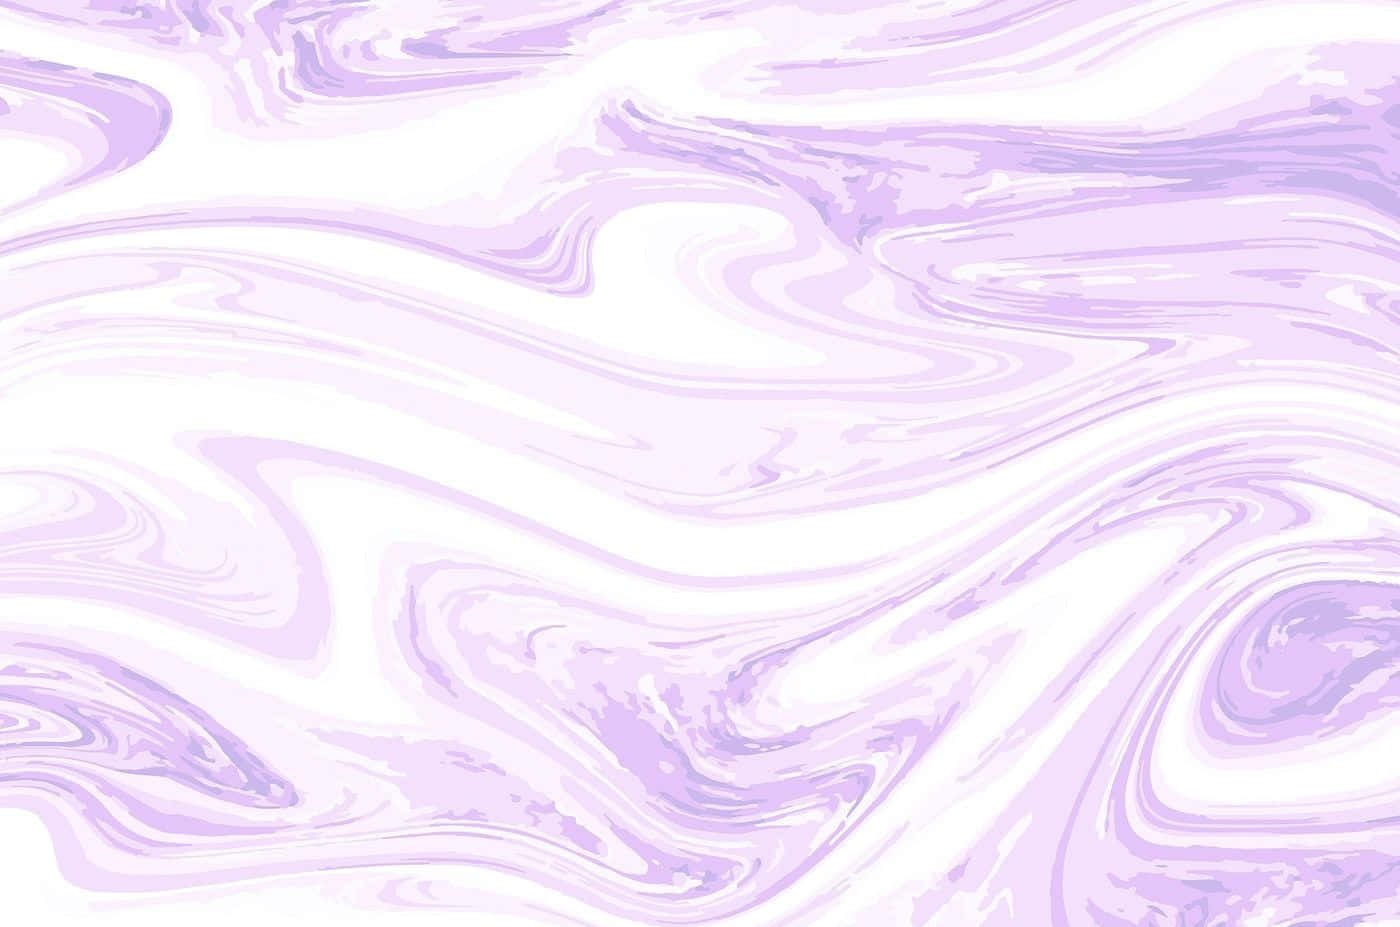 76977 Pink Purple Marble Background Images Stock Photos  Vectors   Shutterstock